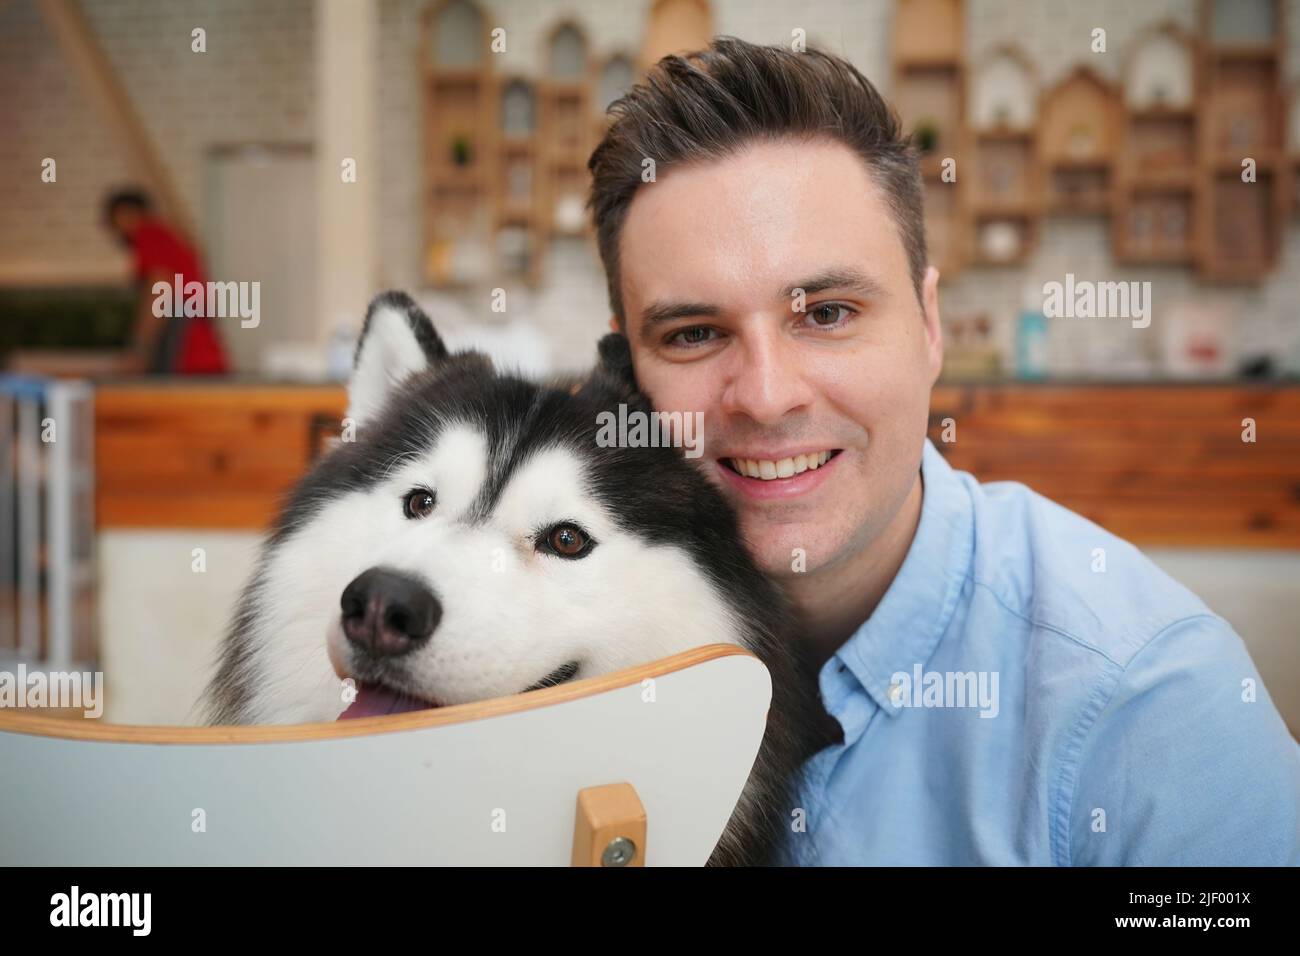 Man with his dog Stock Photo